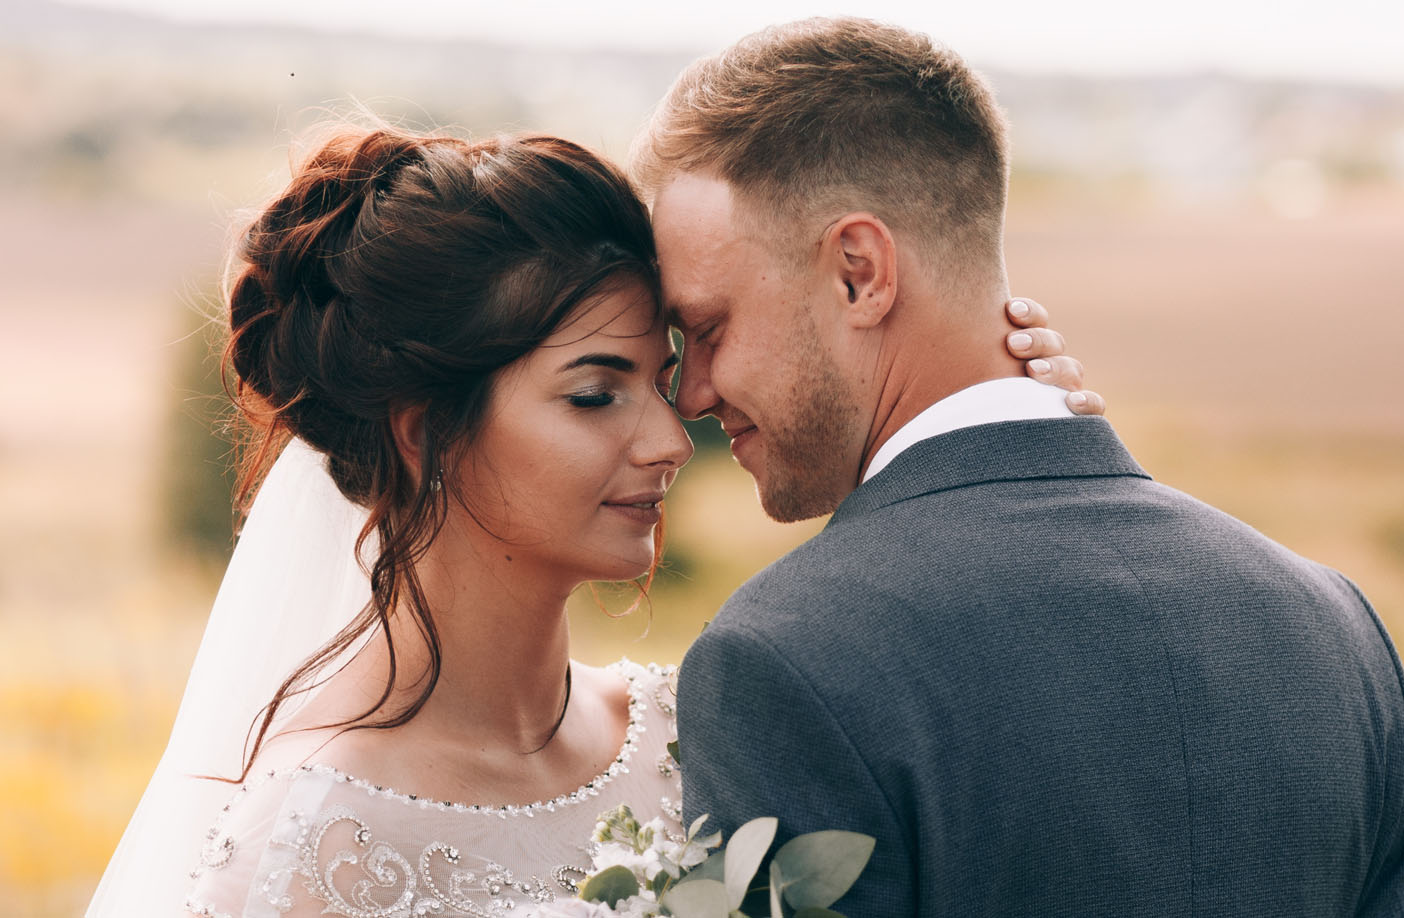 New study sheds light on how premarital factors influence the sex lives of newly-wed couples